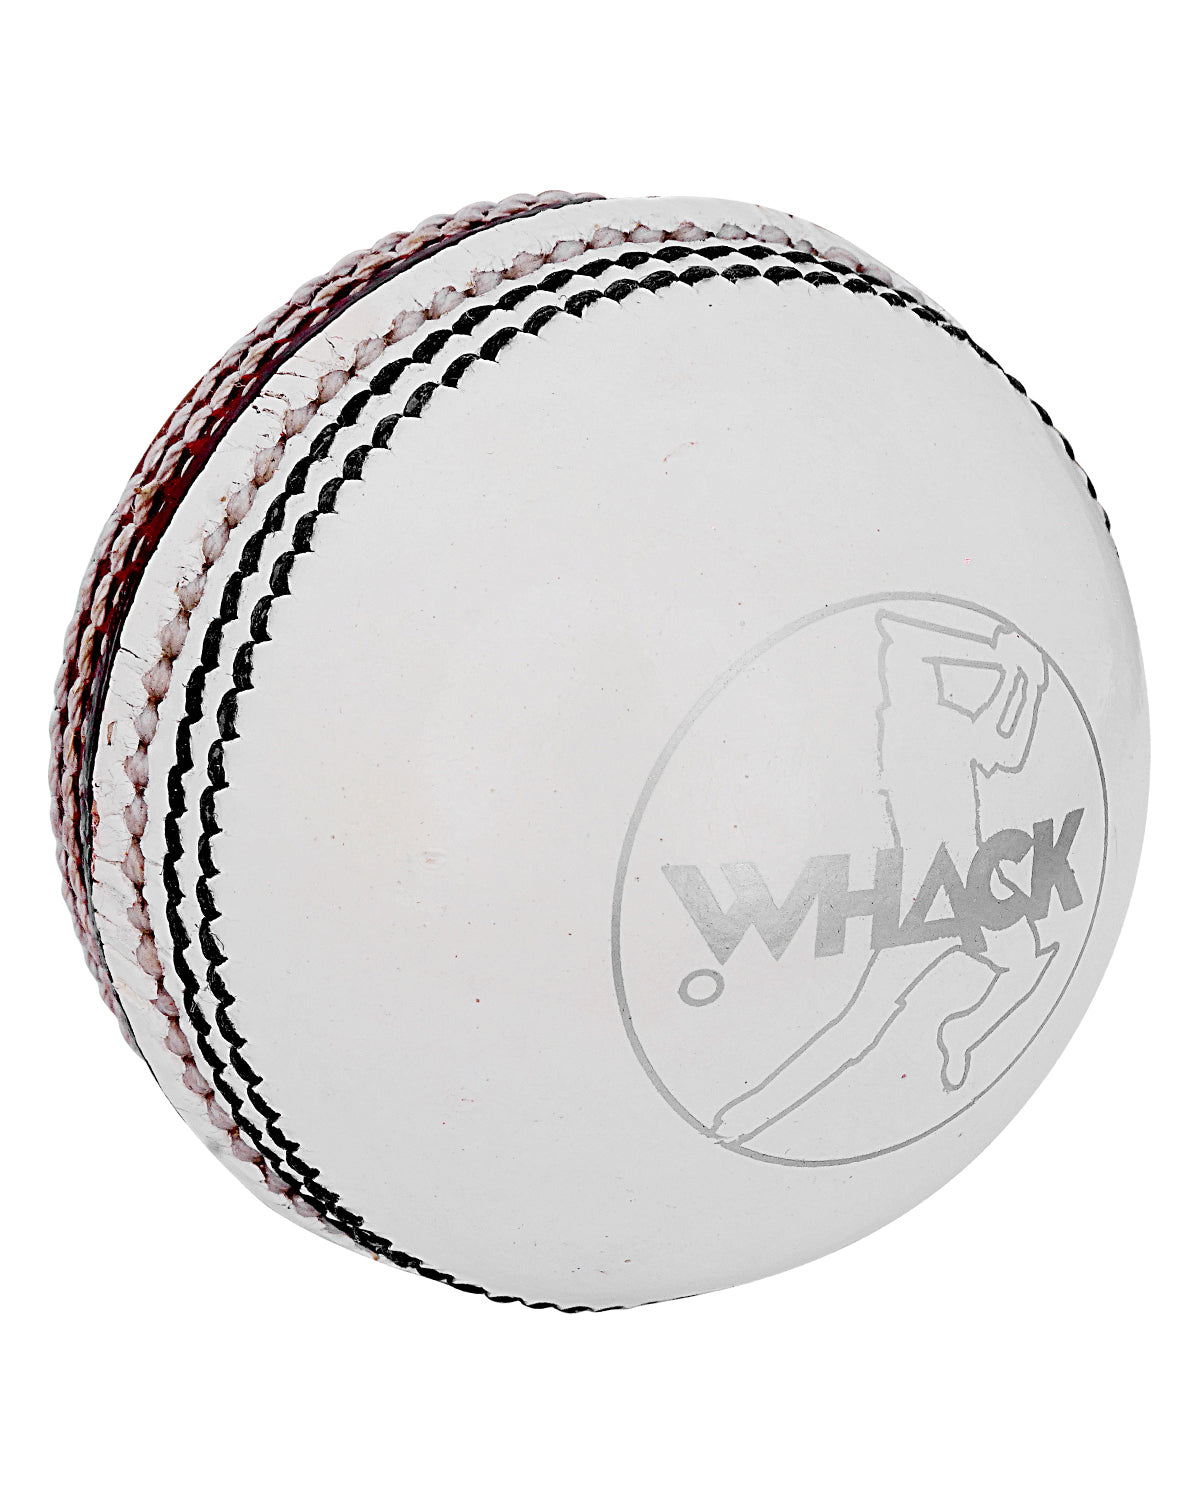 WHACK County Leather Cricket Ball - 2 Piece - 156gm